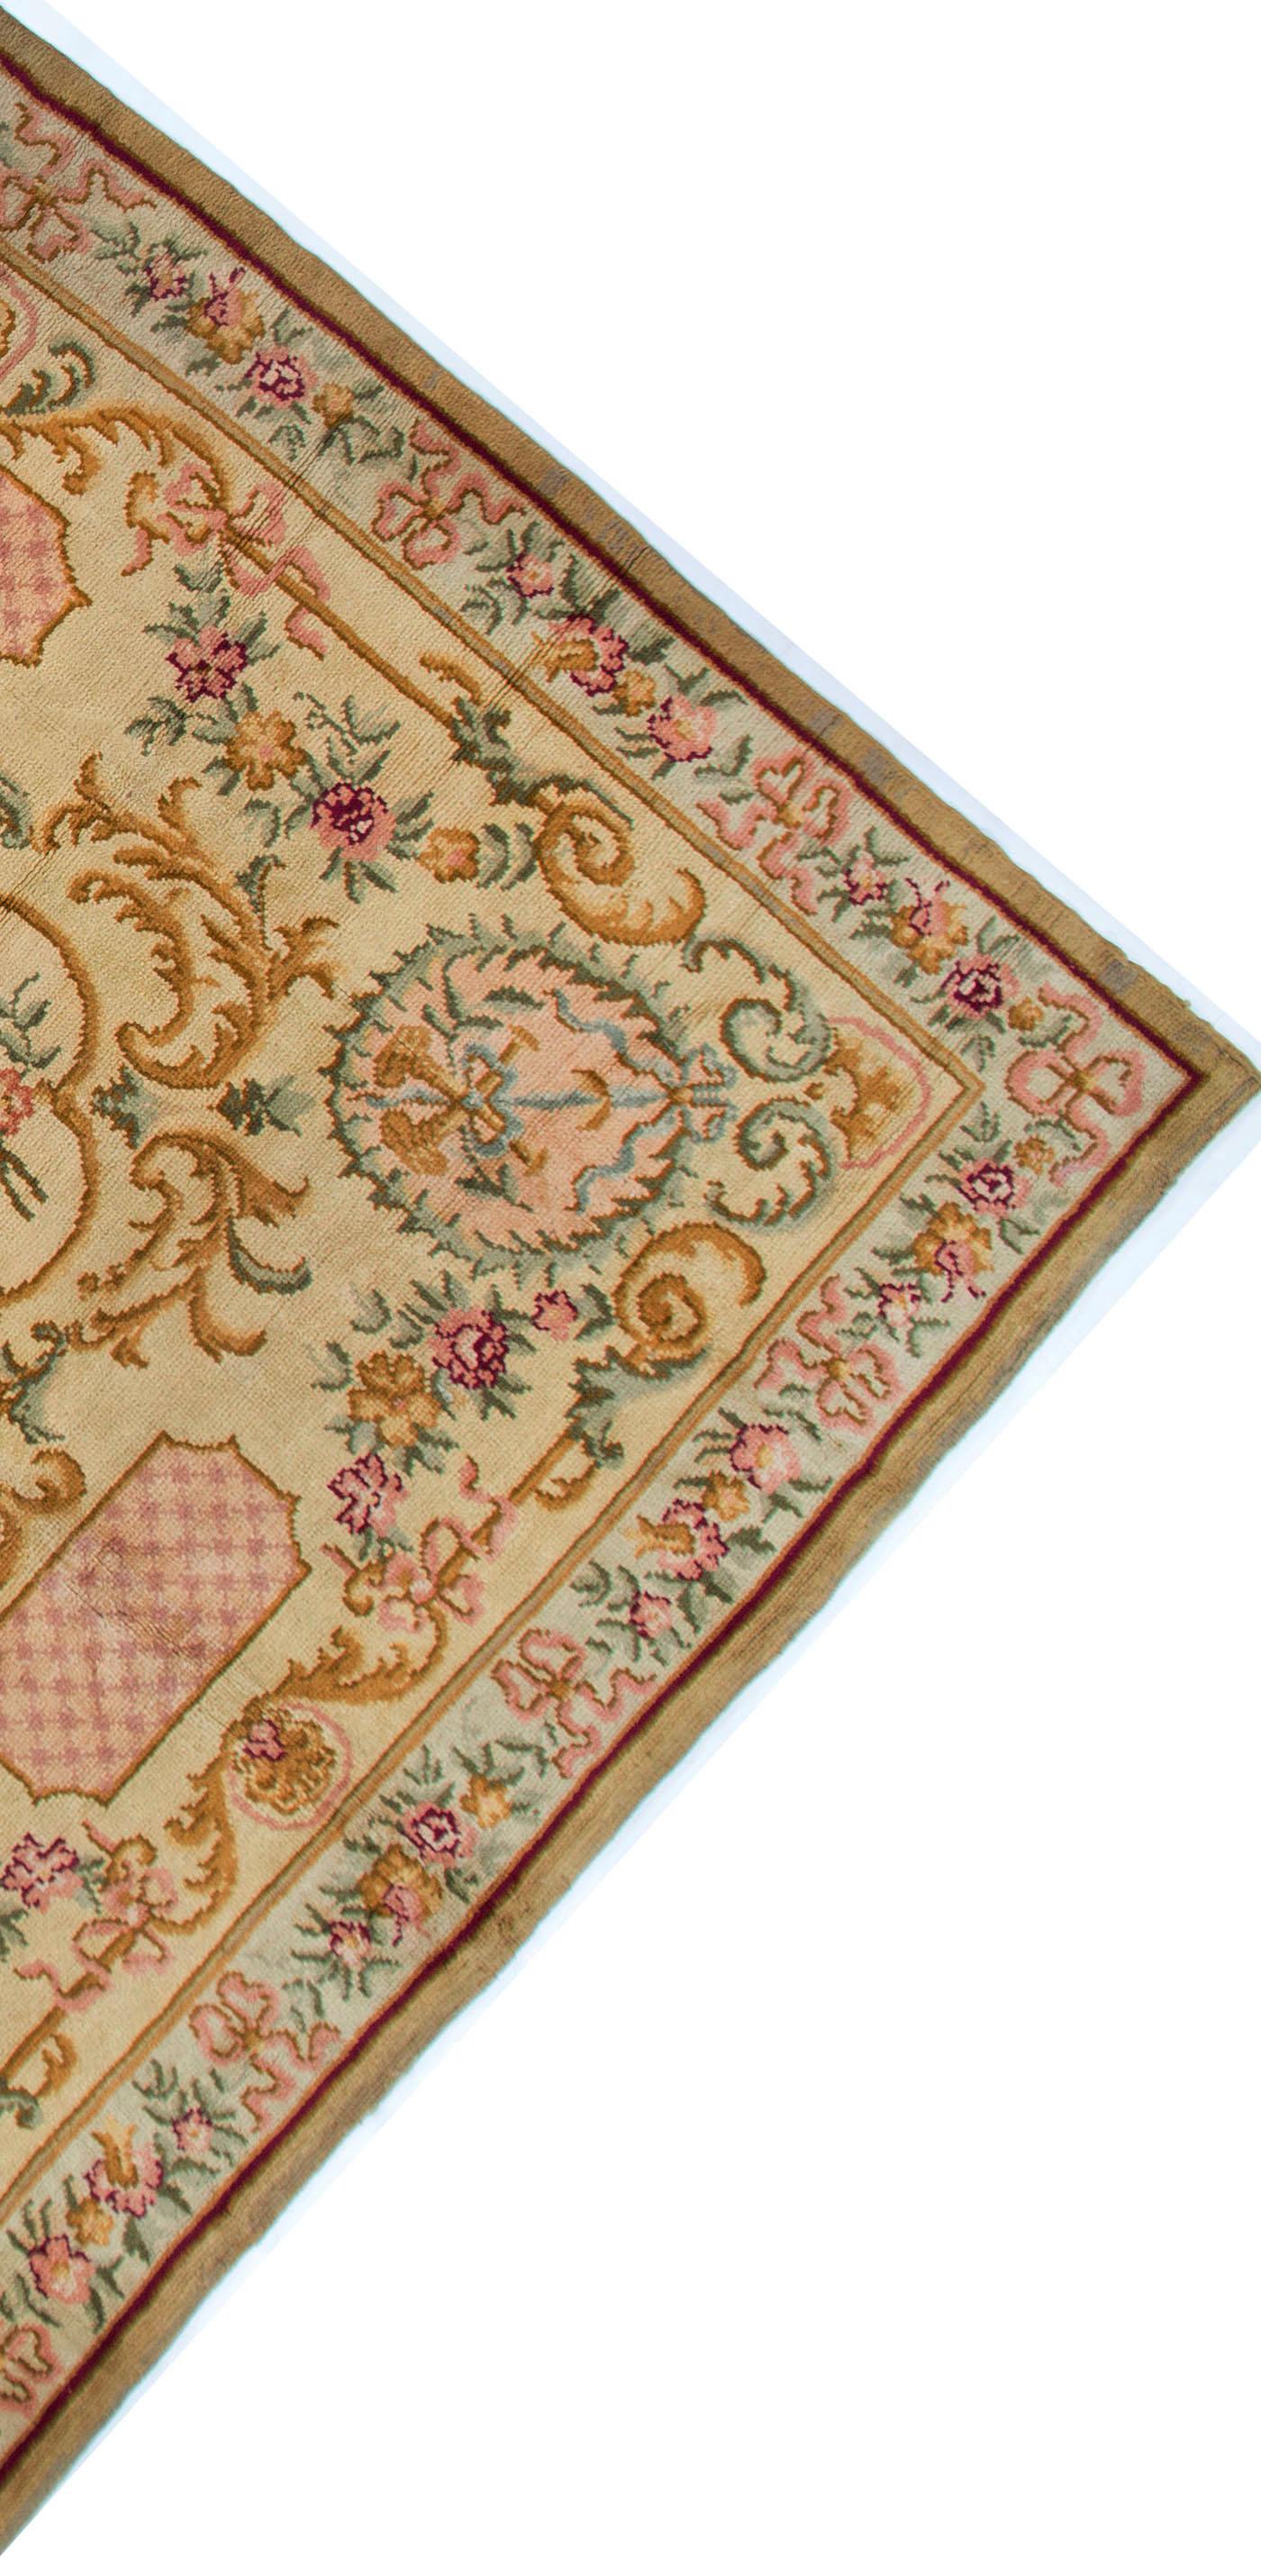 19th Century Antique French Ivory Savonnerie Carpet  10'4 x 12'8 For Sale